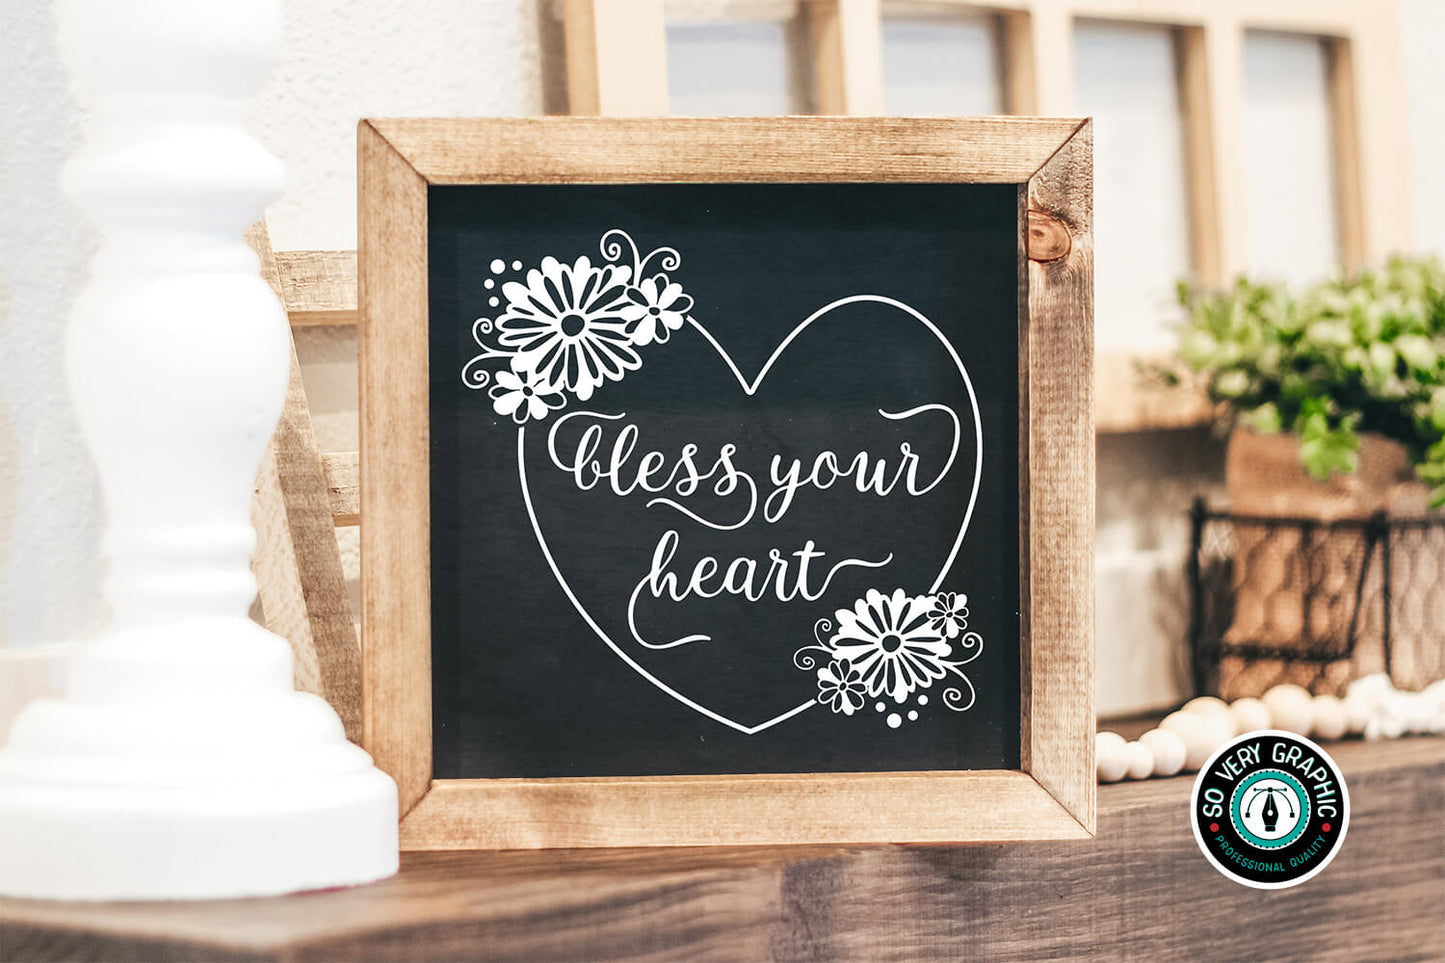 Bless Your Heart SVG design from So Very Graphic used in a square farmhouse frame using white adhesive vinyl